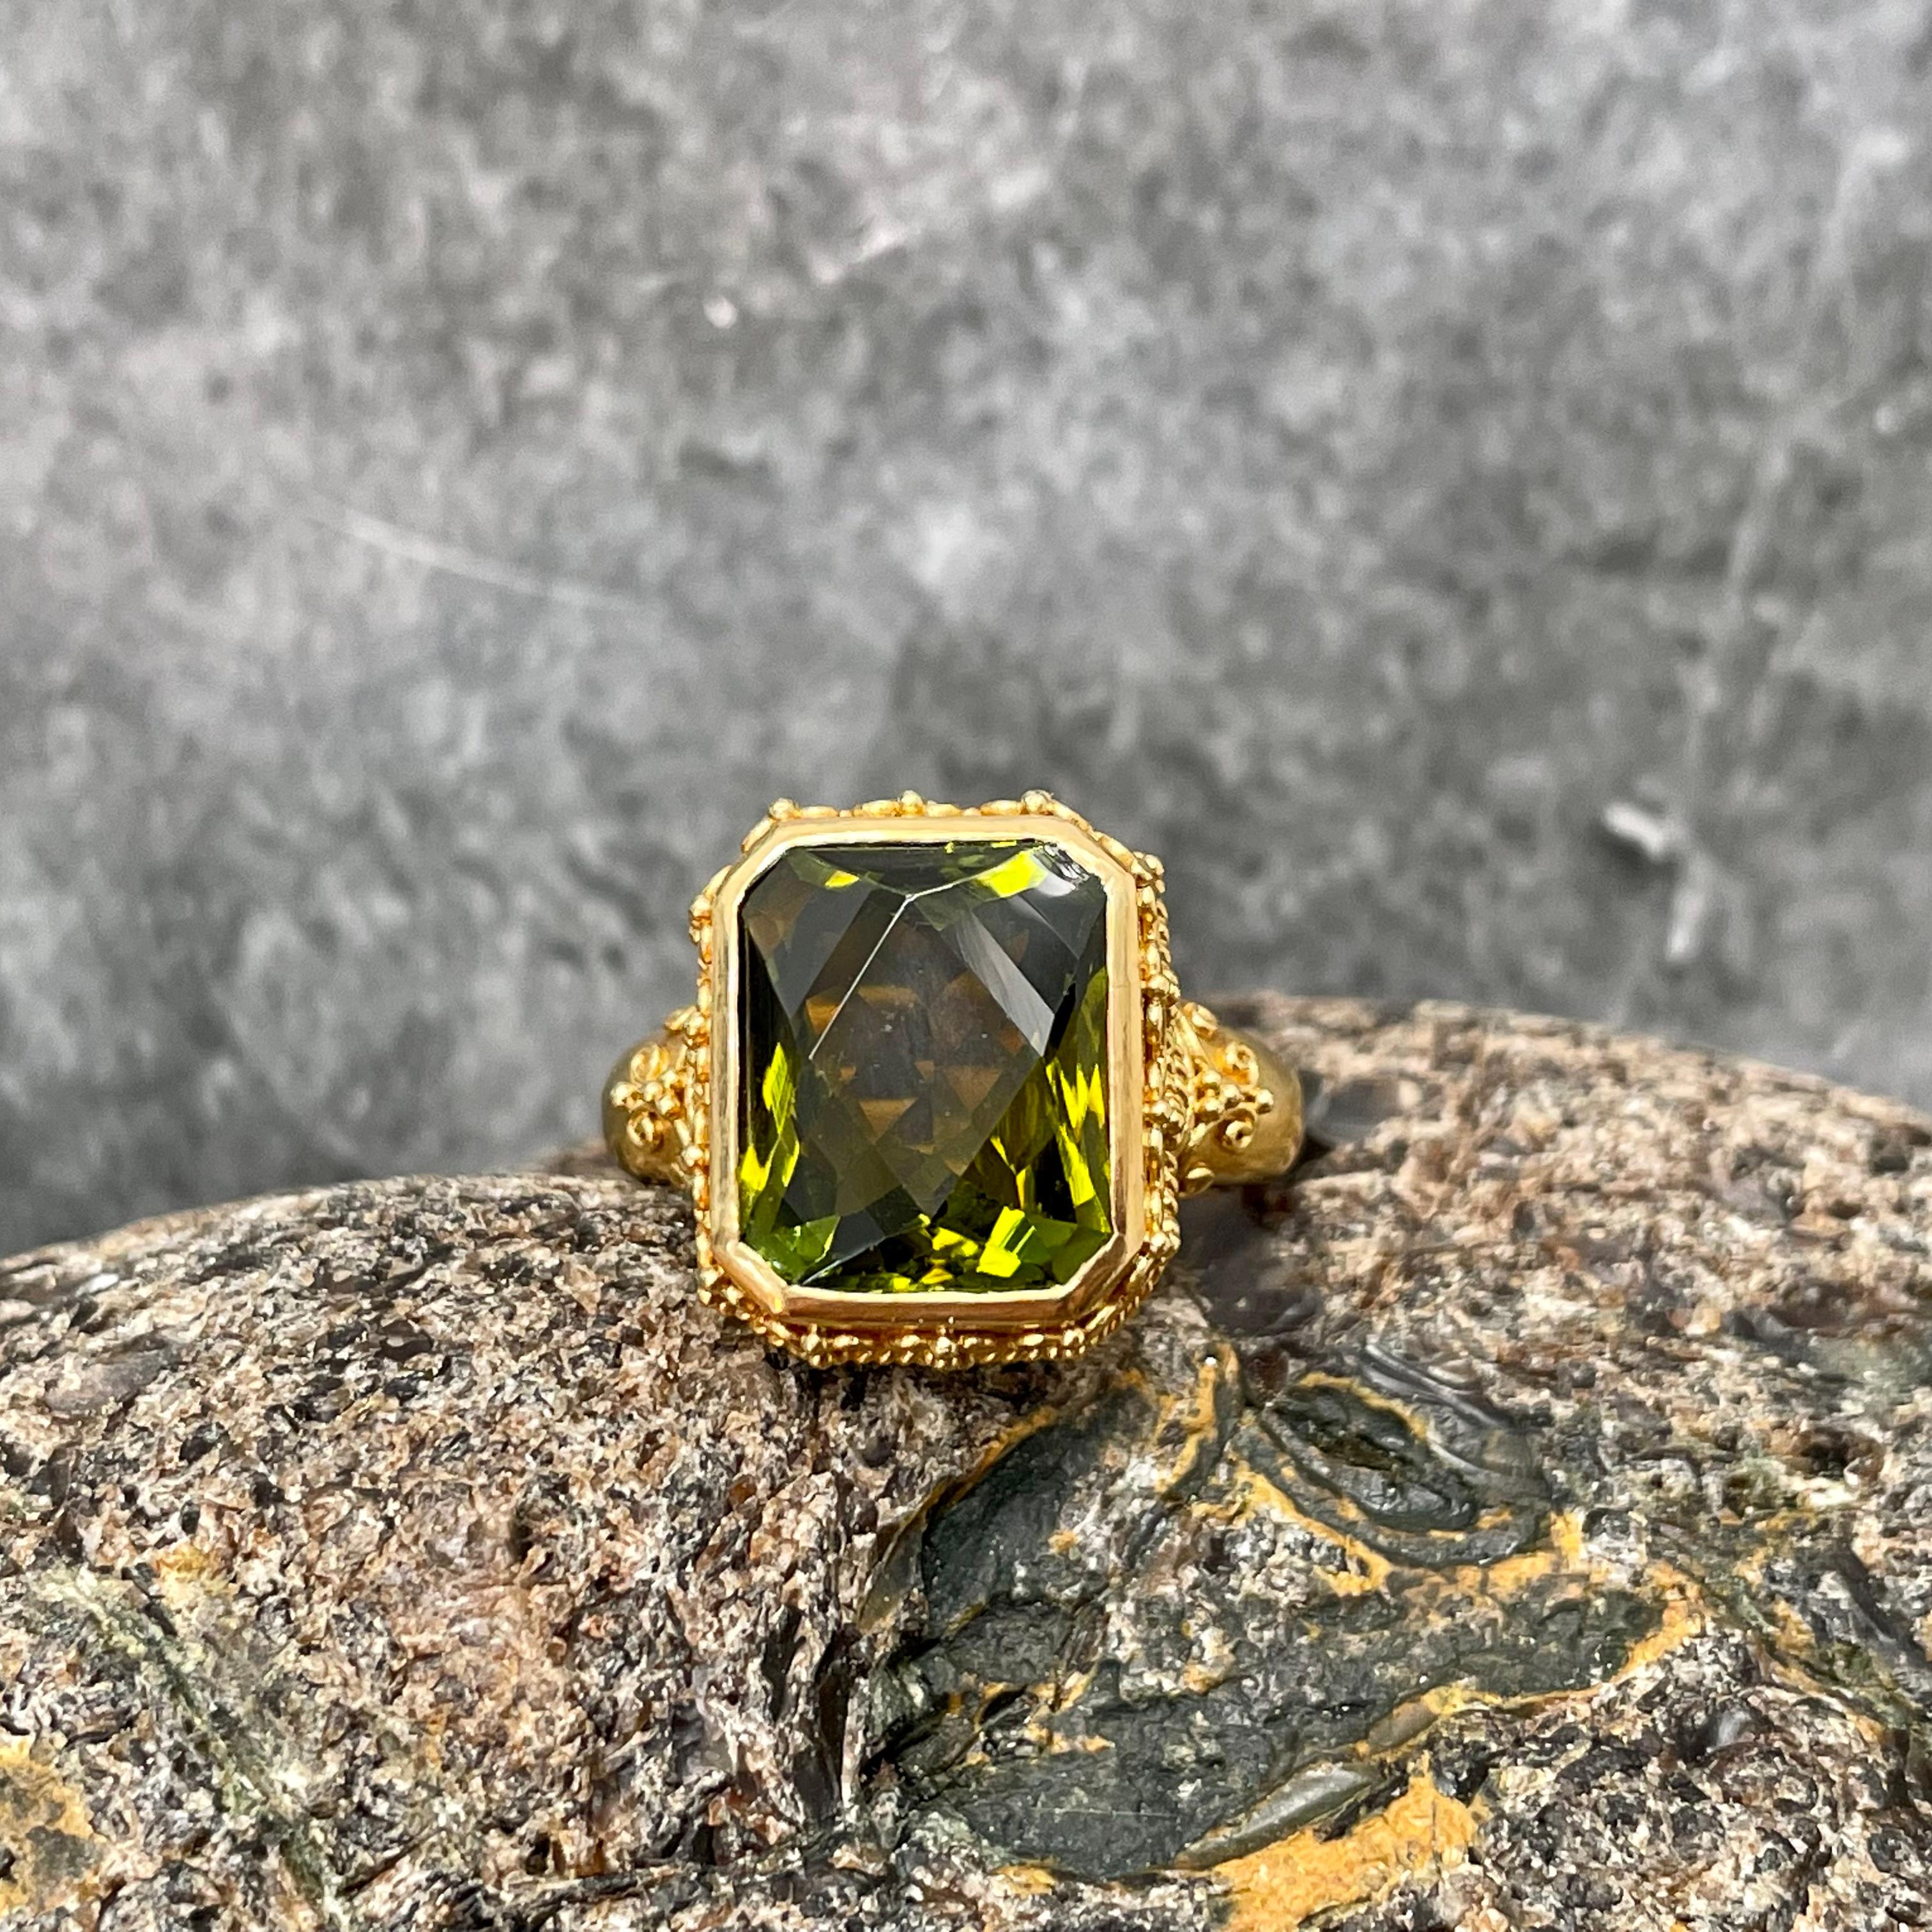 A fancy cut 10 x 12 mm olive colored octagonal green tourmaline is held with intricate ancient-inspired fine hand applied wire work and granulation in this masterpiece of artisanal high-karat gold smithing.  The slightly tapered matte-finish band